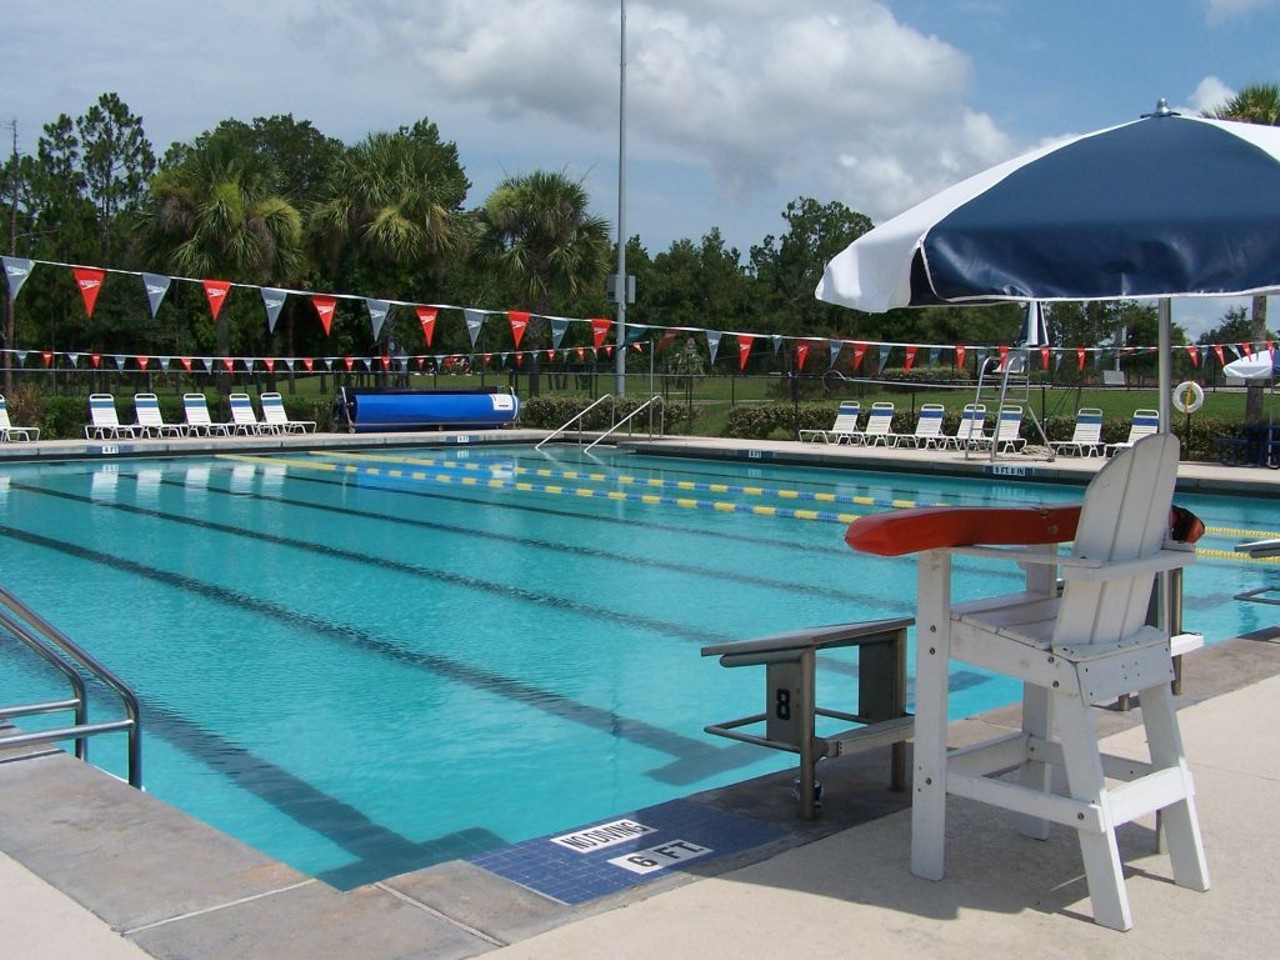 Riverside Pool 
1600 Lockwood Blvd., Oviedo, FL 32765, (407) 971-5582
This pool is open Monday to Sunday from 10 a.m. to 3 p.m. They offer swimming lessons, splash zones, swim teams and water aerobics.  The fee to enter is $3 for residents and $4 for non-residents. 
Photo via City of Oviedo